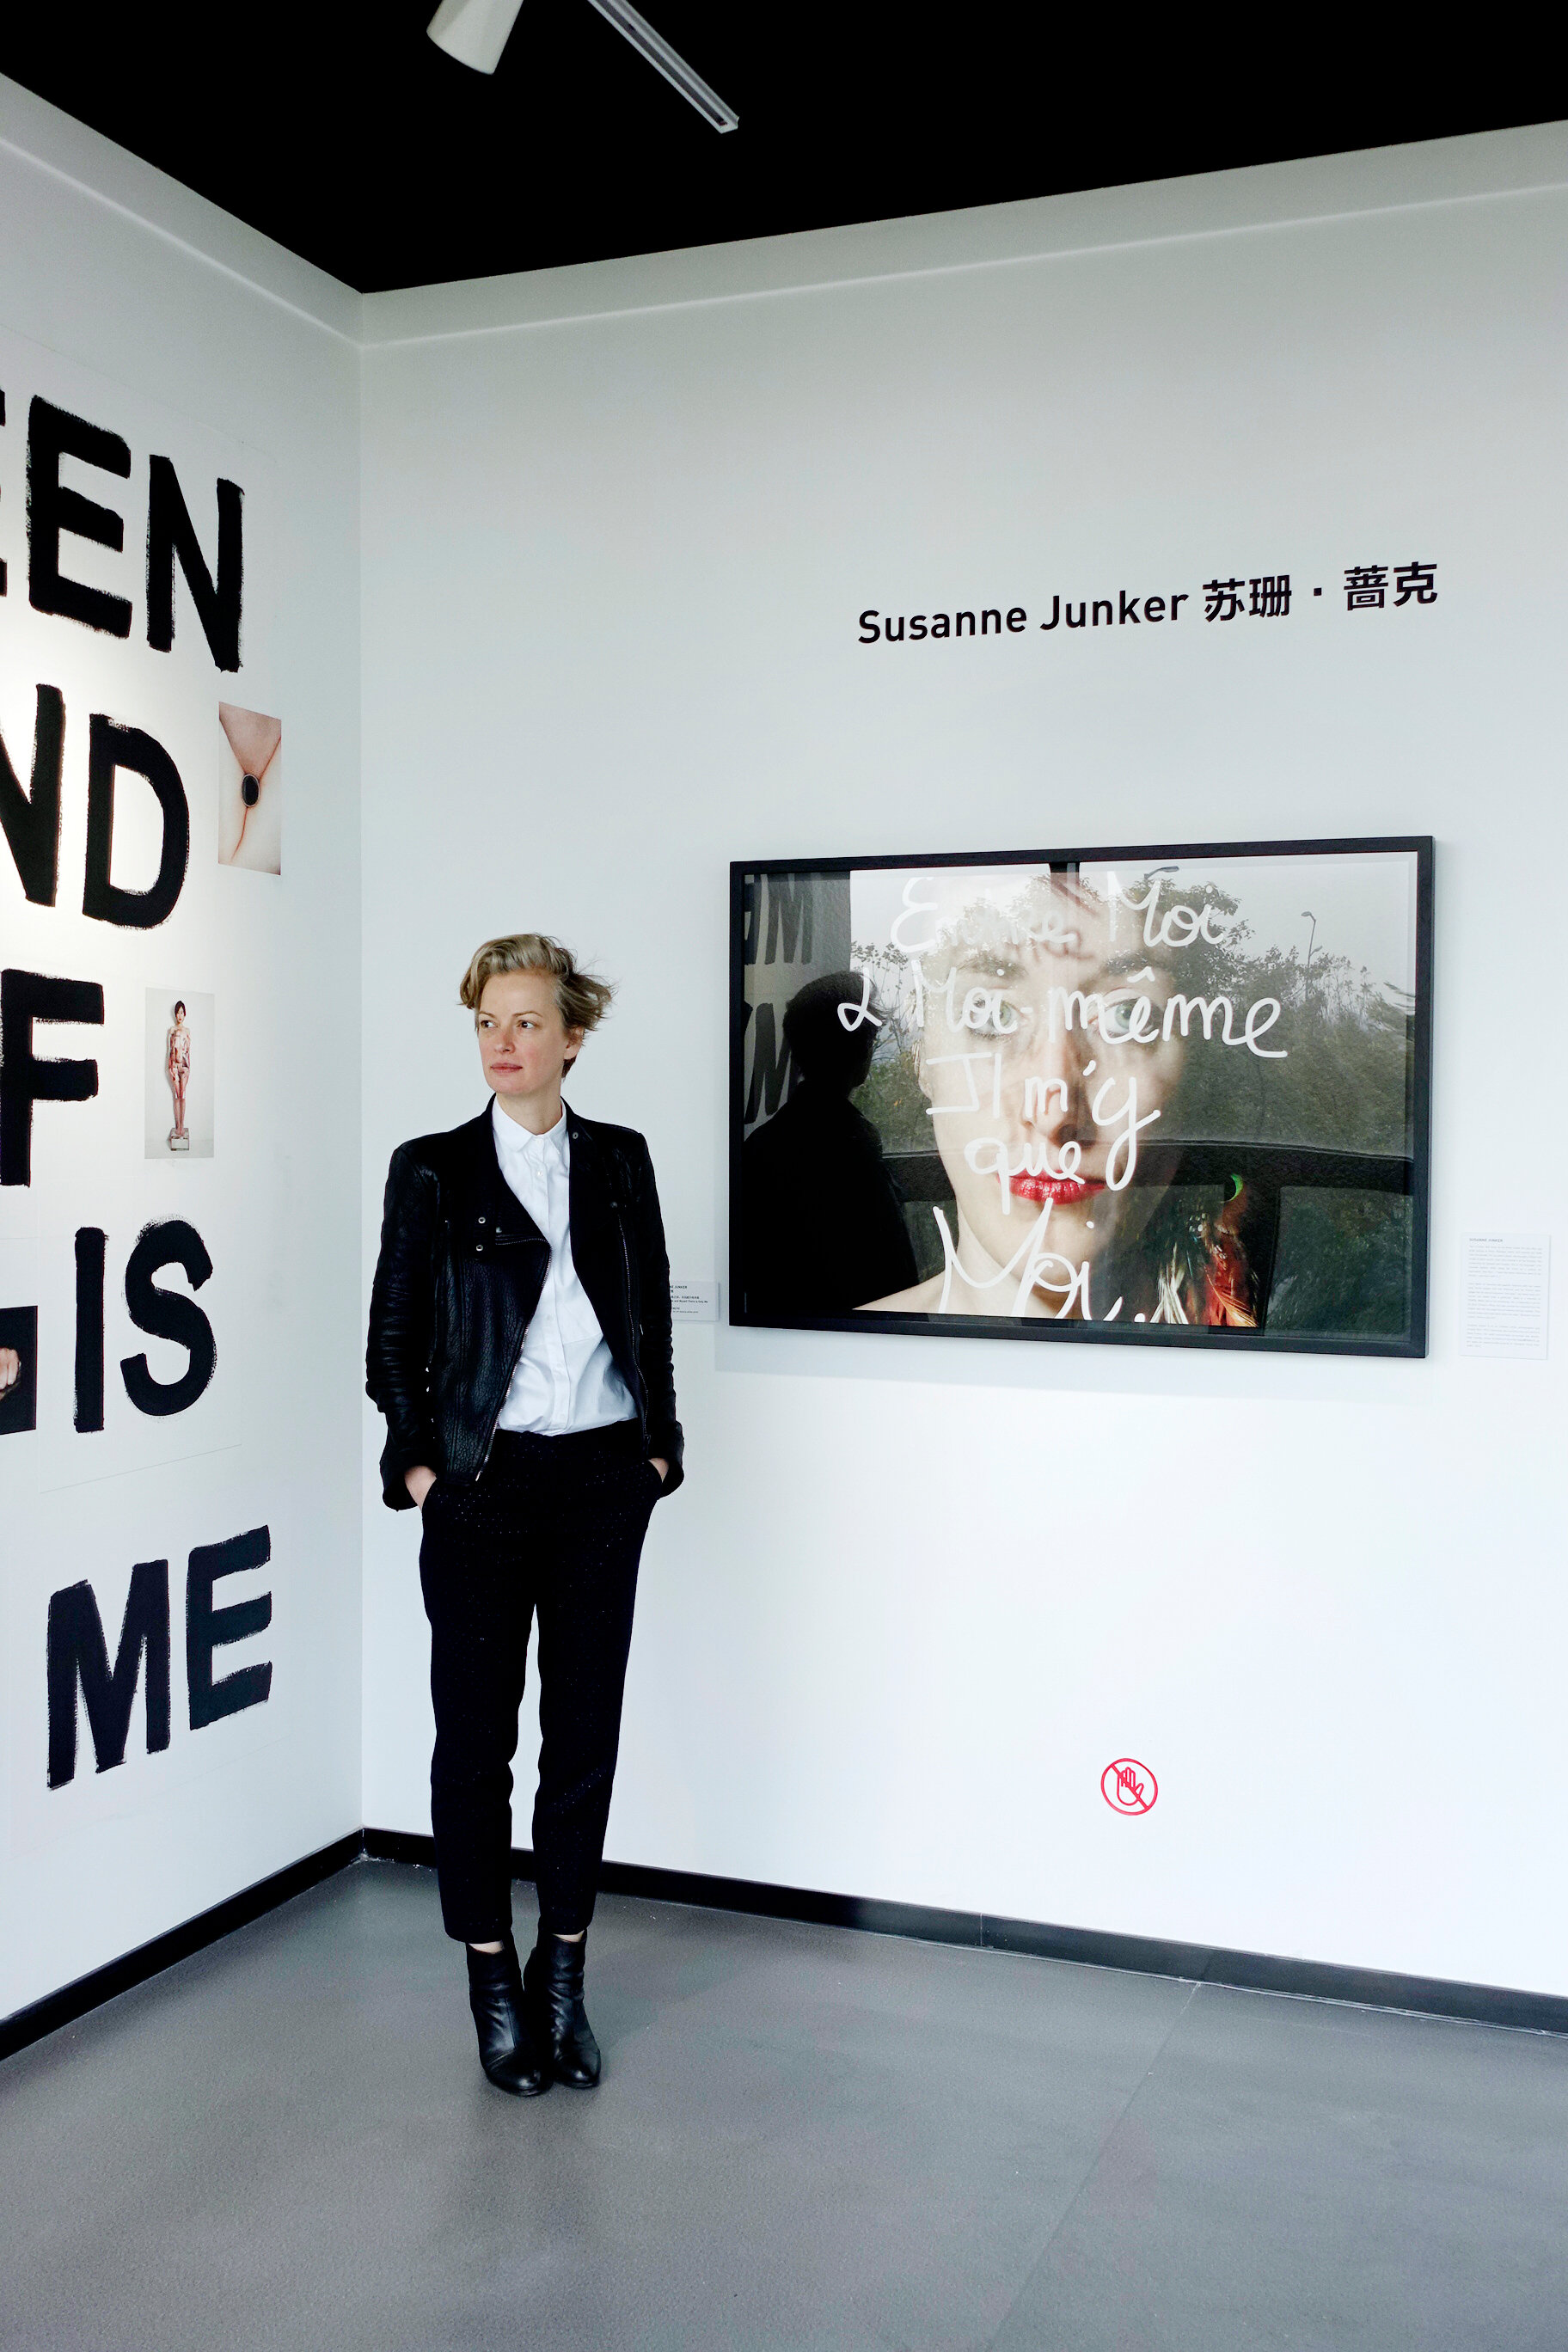  Susanne Junker at the exhibition: “On starting another conversation about comparative feminism”, WhyWhyArt, 2017, Nanjing, China. 